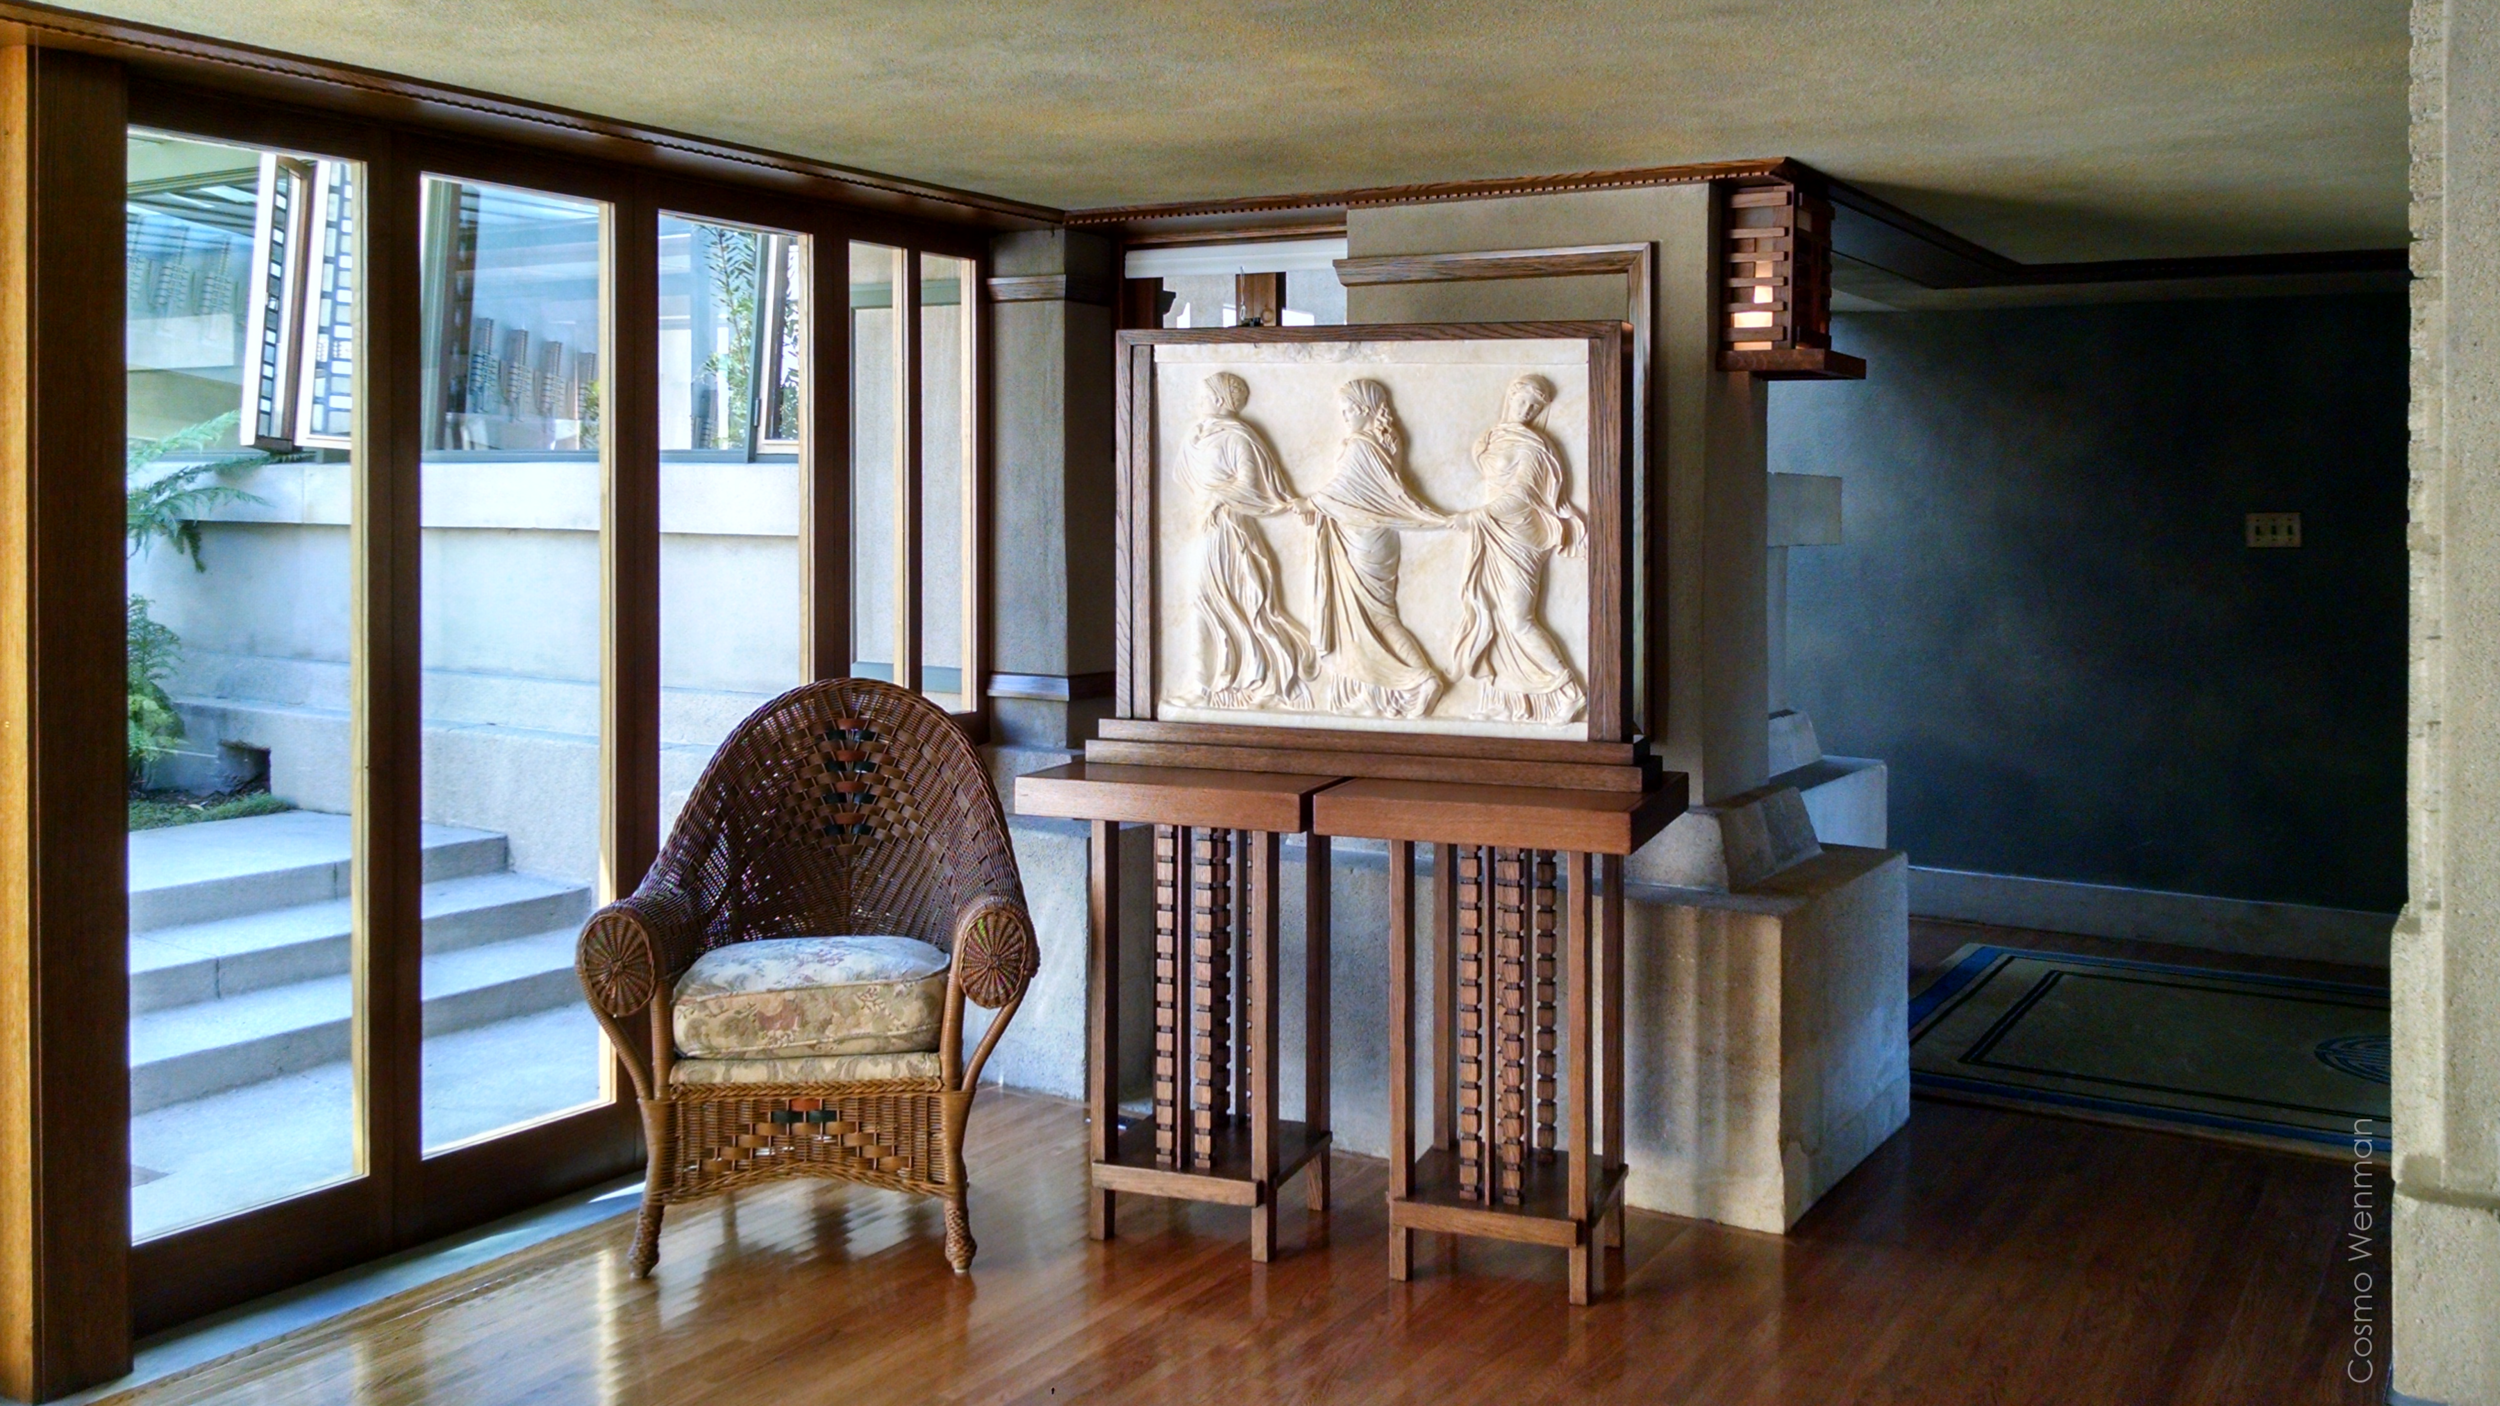   Concept Realizations' final replica, installed at Hollyhock House  